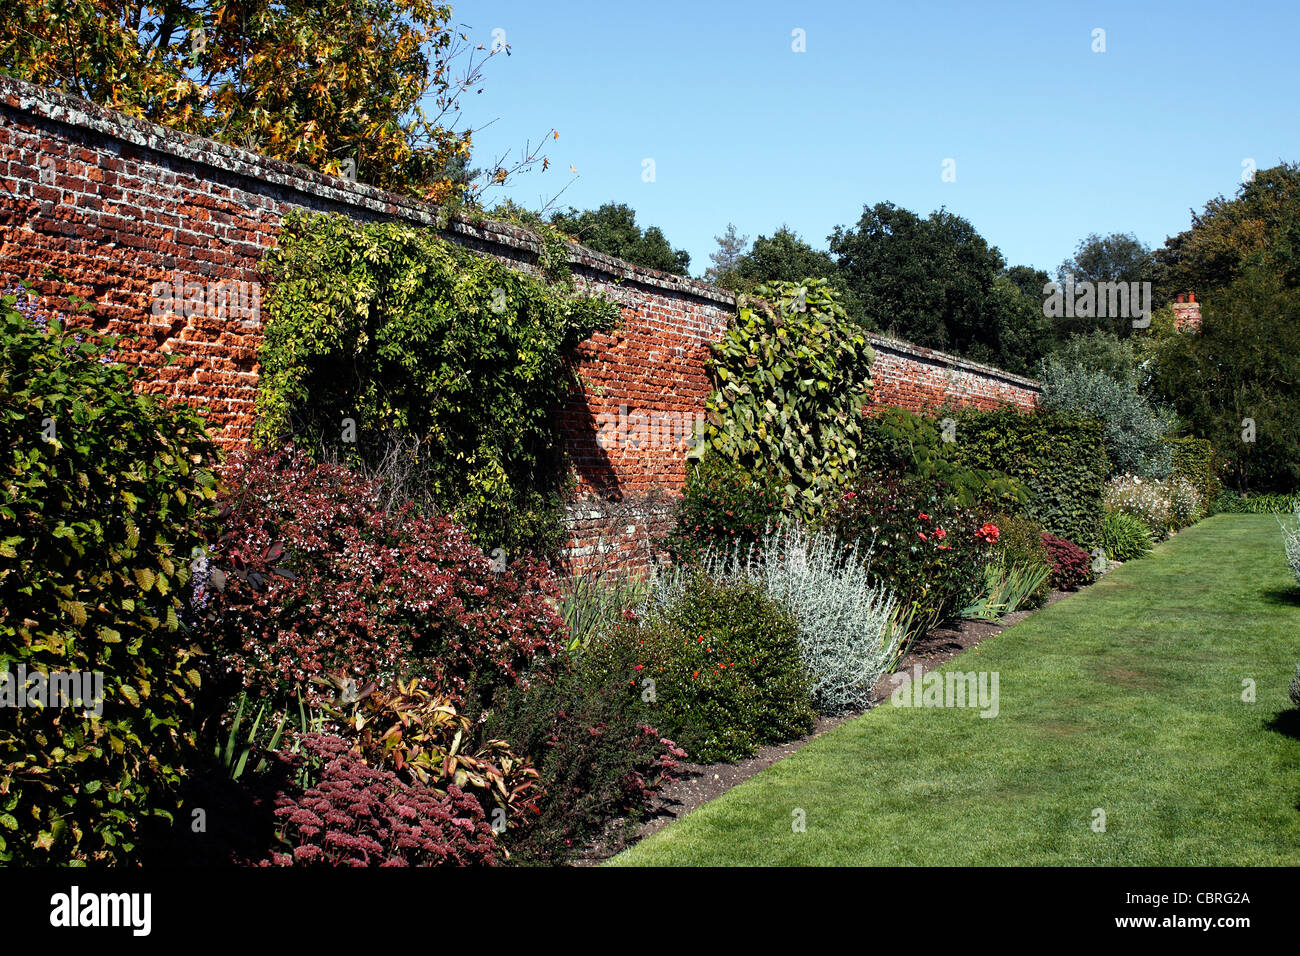 A SHRUBBERY IN AN HISTORIC WALLED ENGLISH COUNTRY GARDEN. Stock Photo